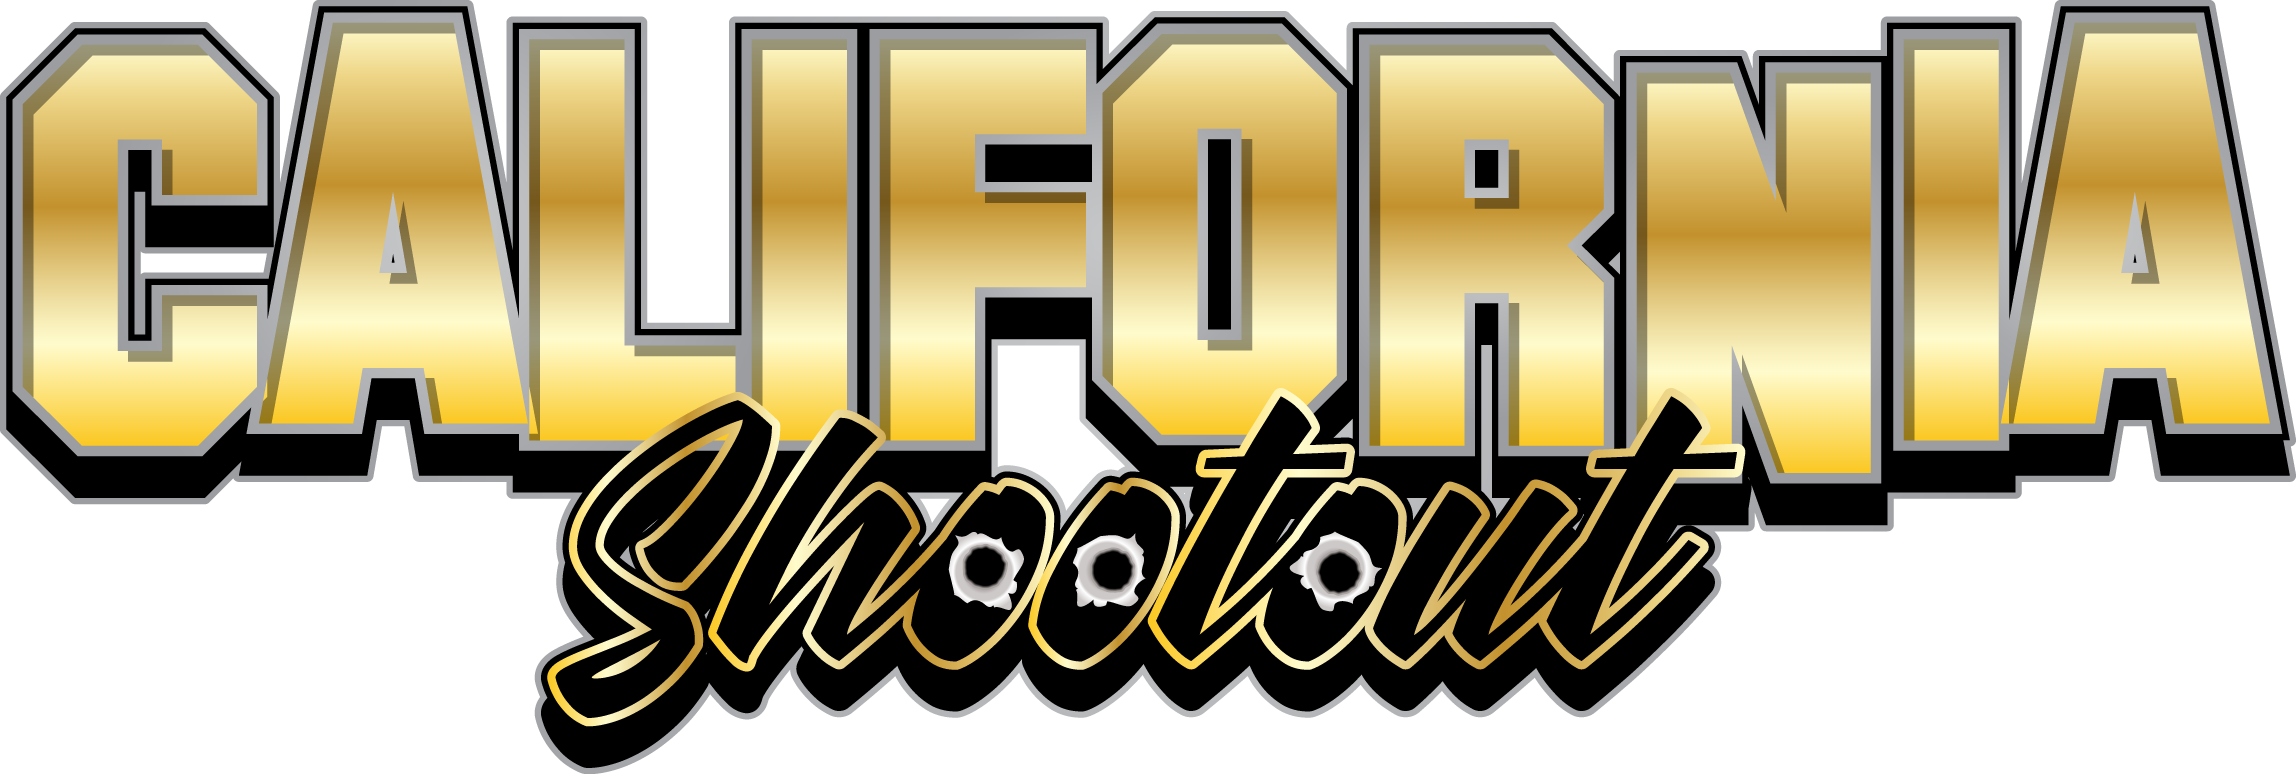 The 2nd Annual California Shootout, One Of The Best - The 2nd Annual California Shootout, One Of The Best (2296x774)